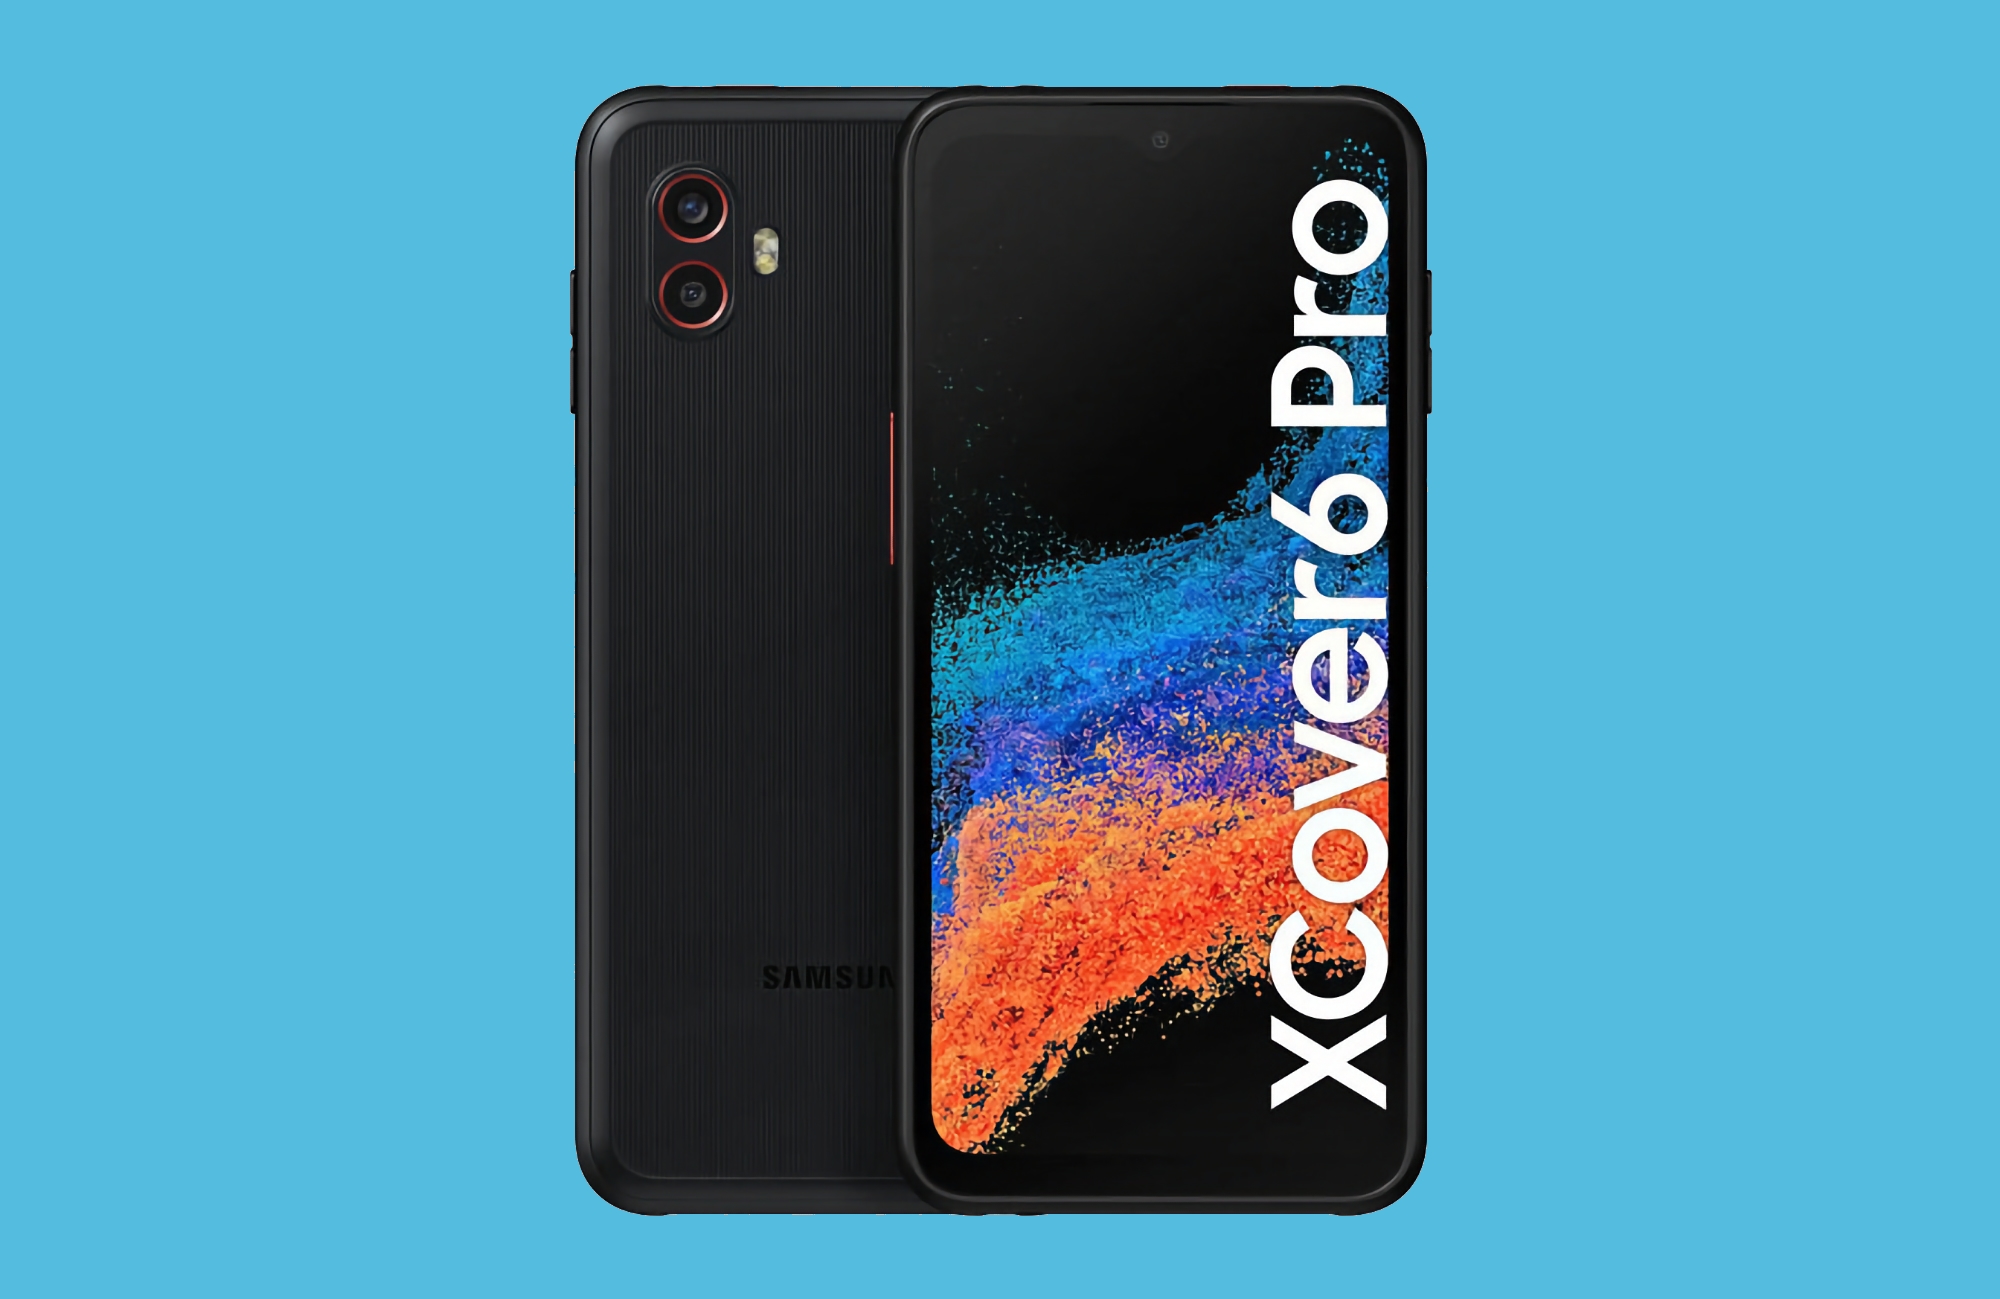 Samsung has released One UI 6.1 for the Galaxy Xcover 6 Pro, but without Galaxy AI